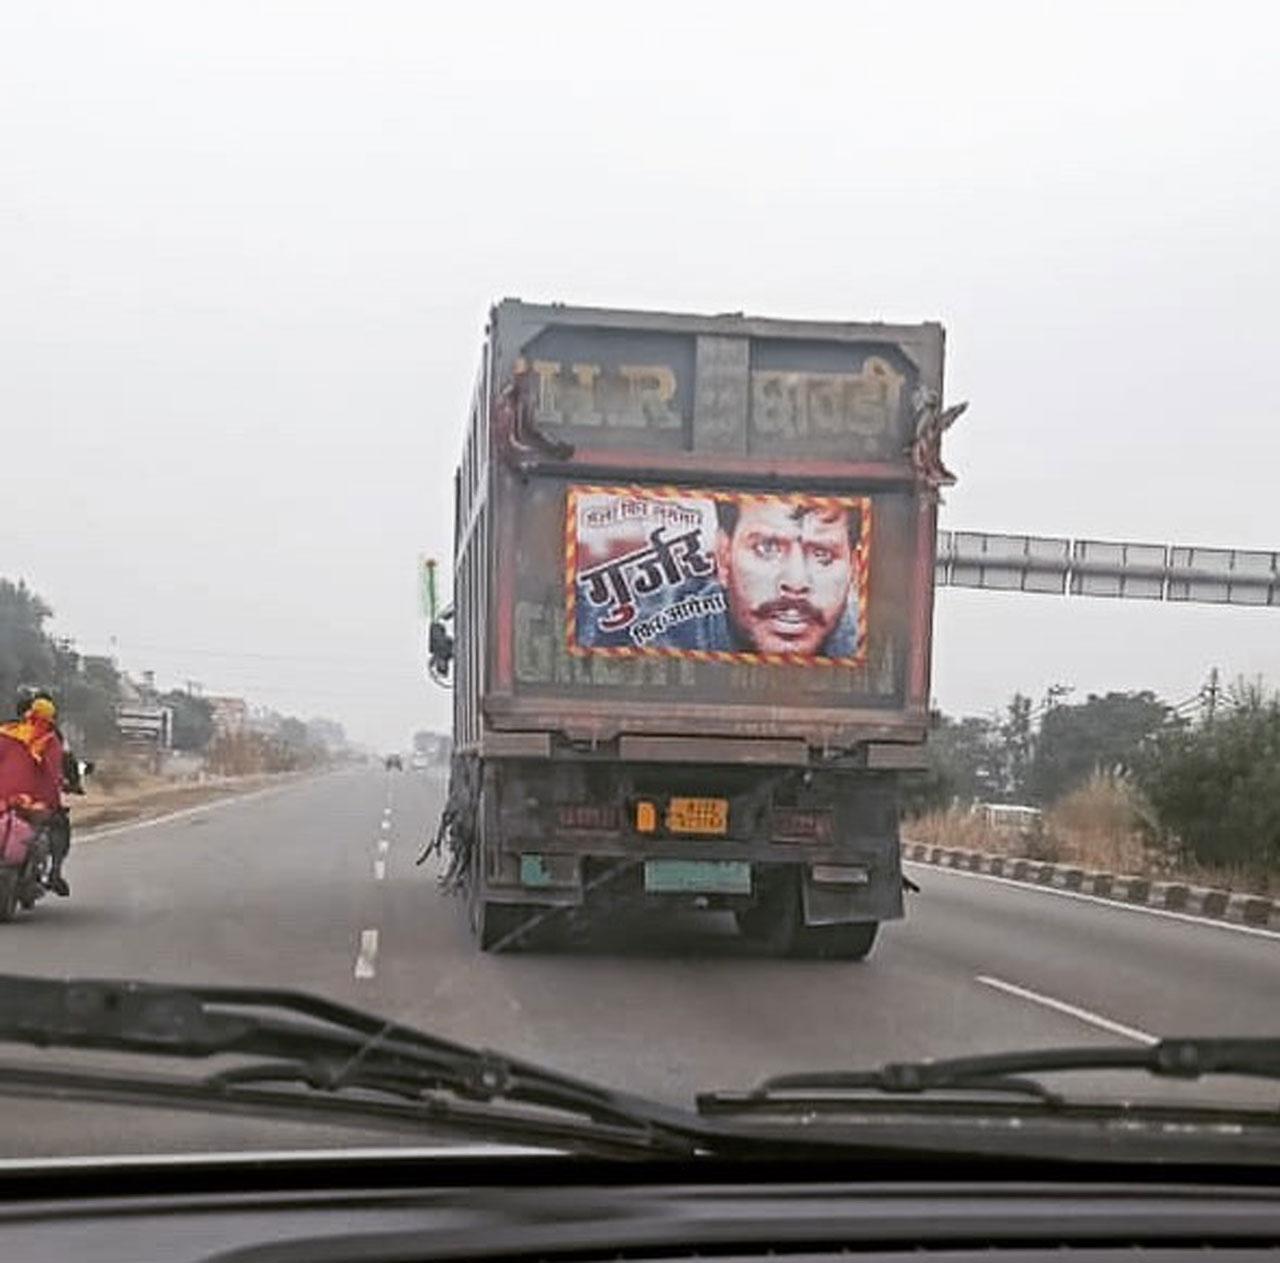 The ‘Mela’ memories
Mela was the film that compelled Twinkle Khanna to keep her promise to marry Akshay Kumar, as confessed by the couple multiple times over the years. It bombed, but the memories of this misfire overpower all her celluloid successes. A truck driver unapologetically flaunted a poster of the film’s antagonist at its rear side and Twinkle couldn’t resist but share a reaction. She said, 